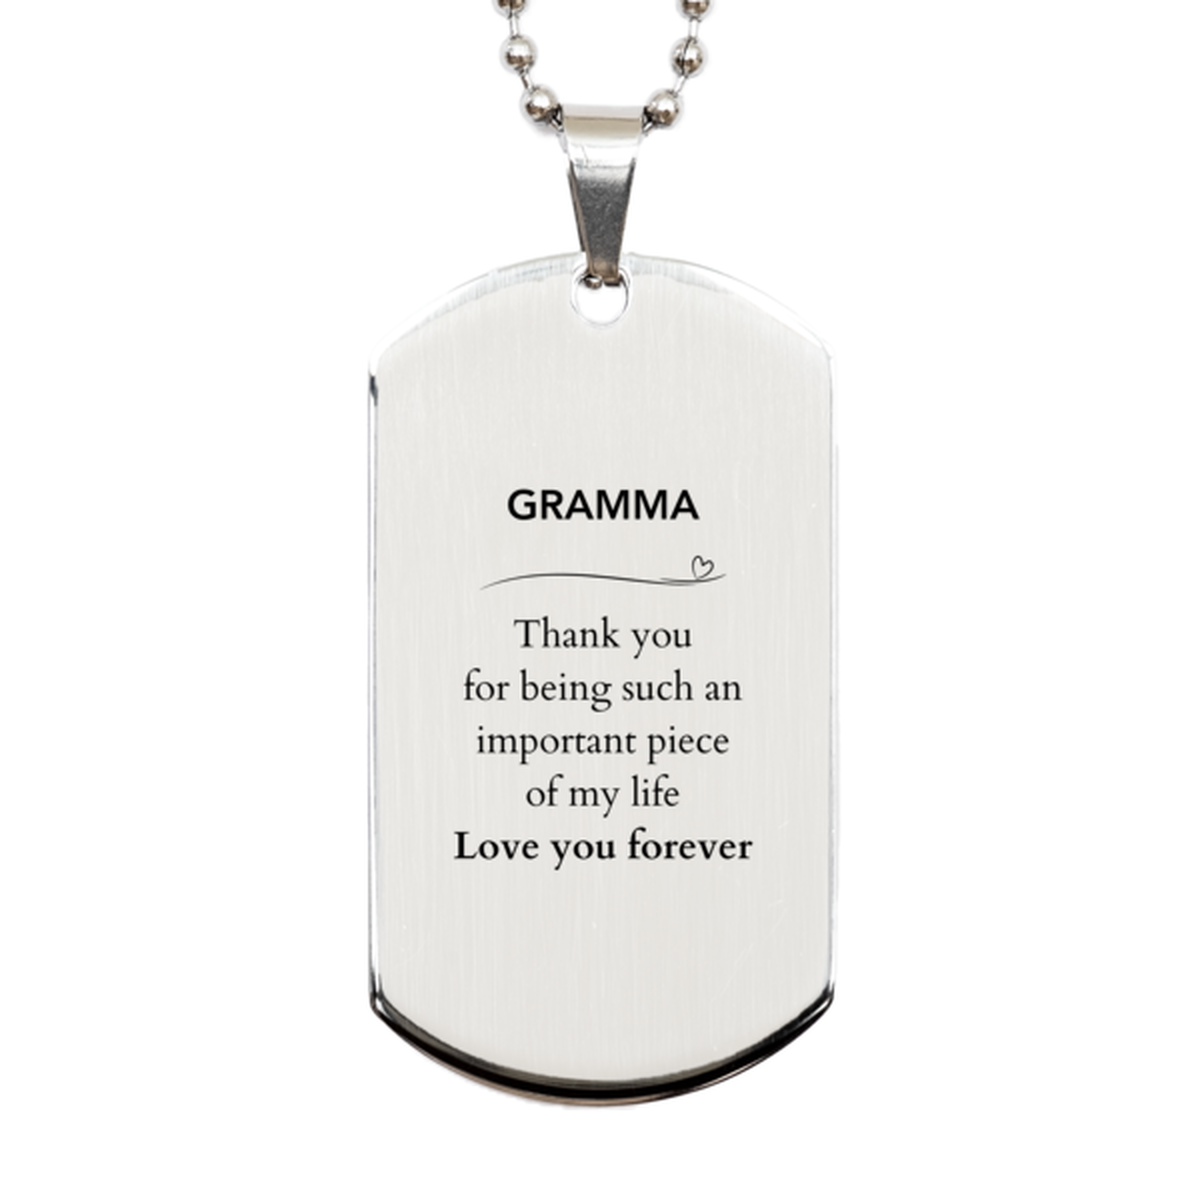 Appropriate Gramma Silver Dog Tag Epic Birthday Gifts for Gramma Thank you for being such an important piece of my life Gramma Christmas Mothers Fathers Day